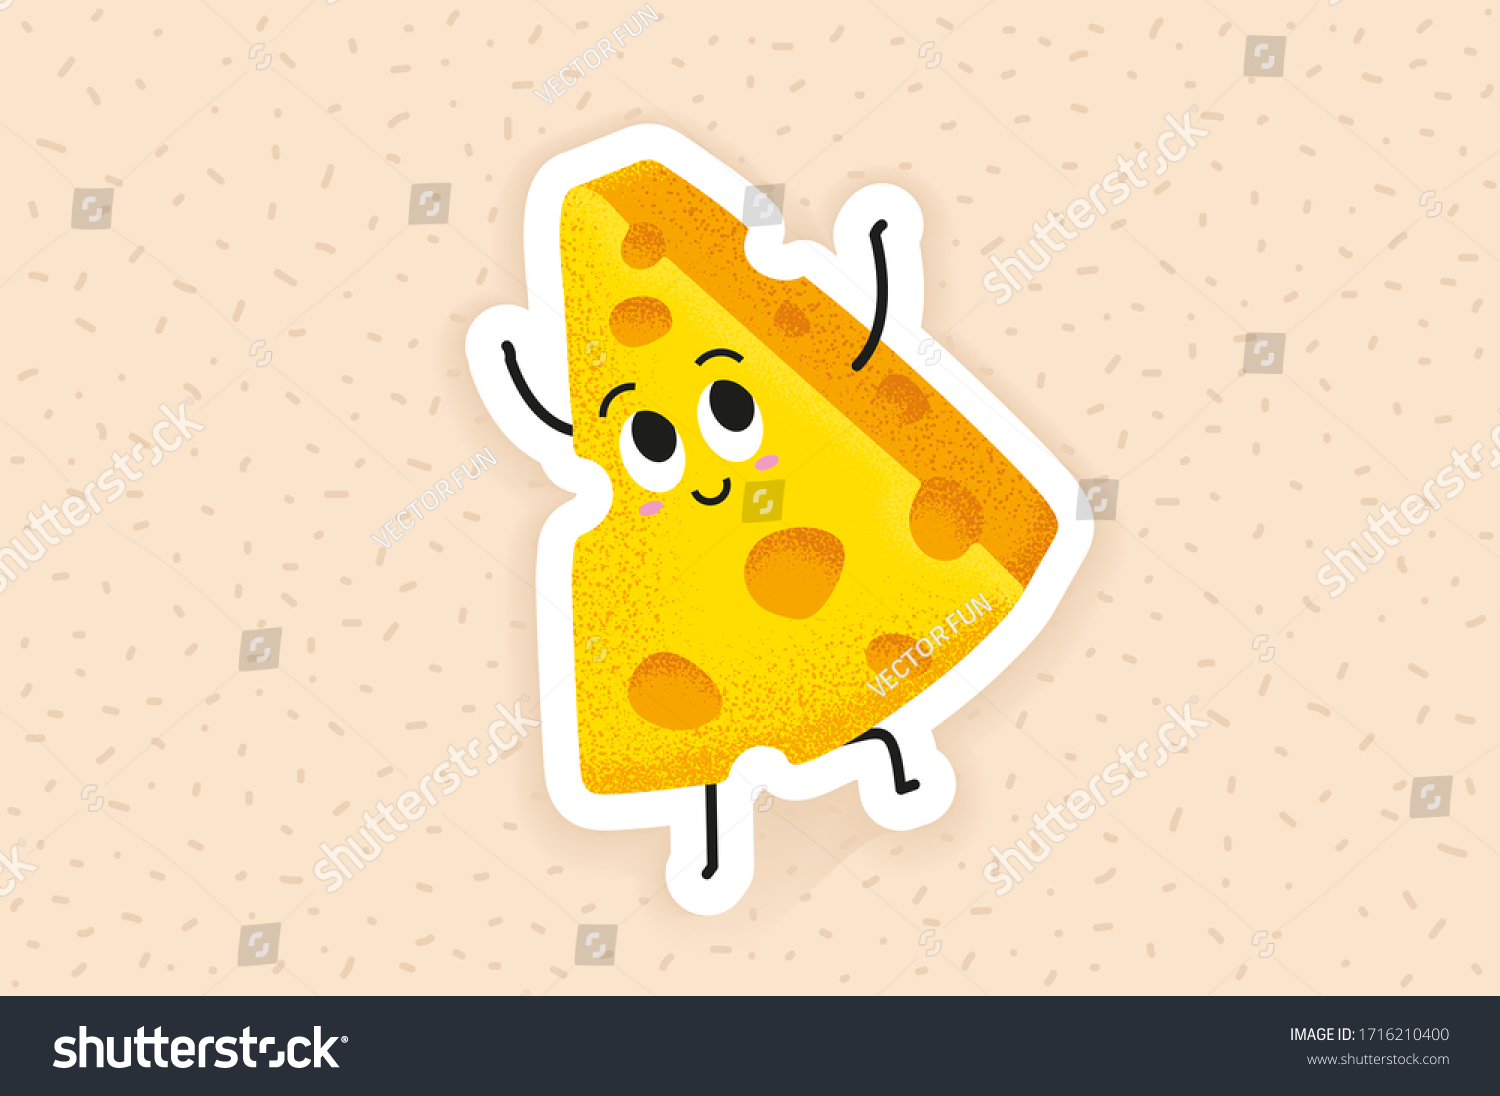 SVG of Kawaii cheese character vector illustration. Funny happy cute smiling cheese. Flat cartoon character illustration icon. Happy funny asian character for children's restaurant menu, Fast Food sticker svg